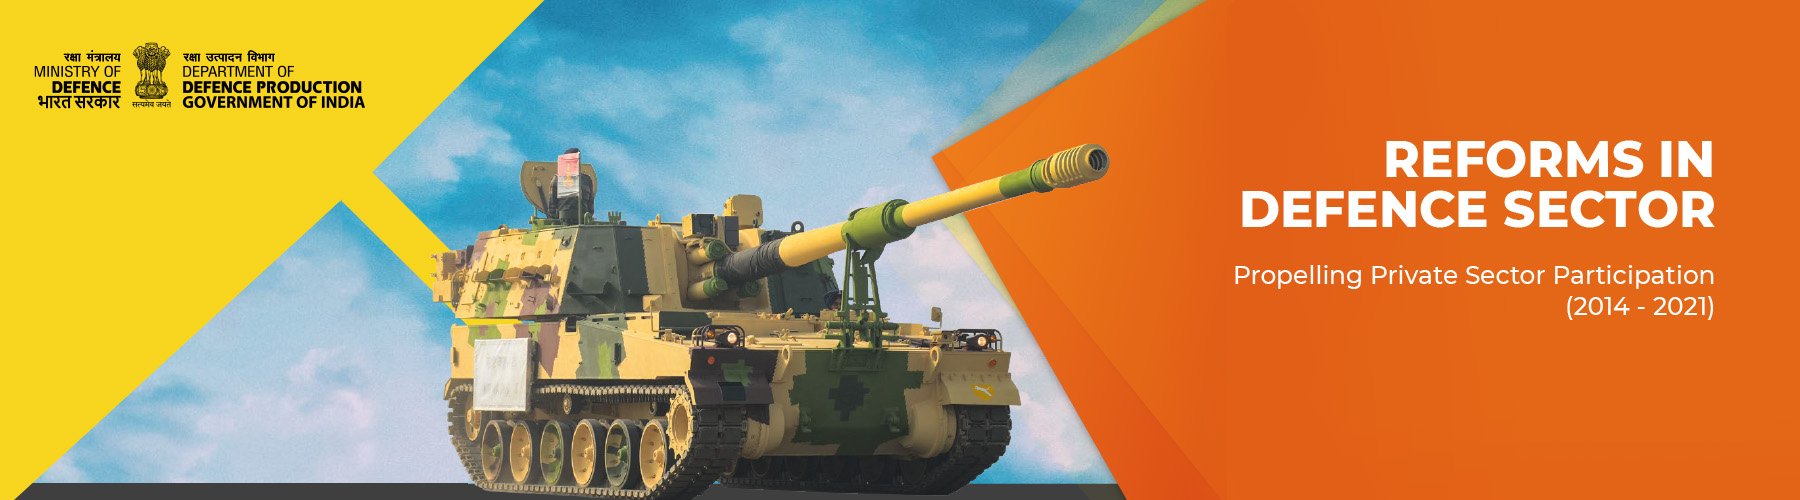 Reforms in Defence Sector